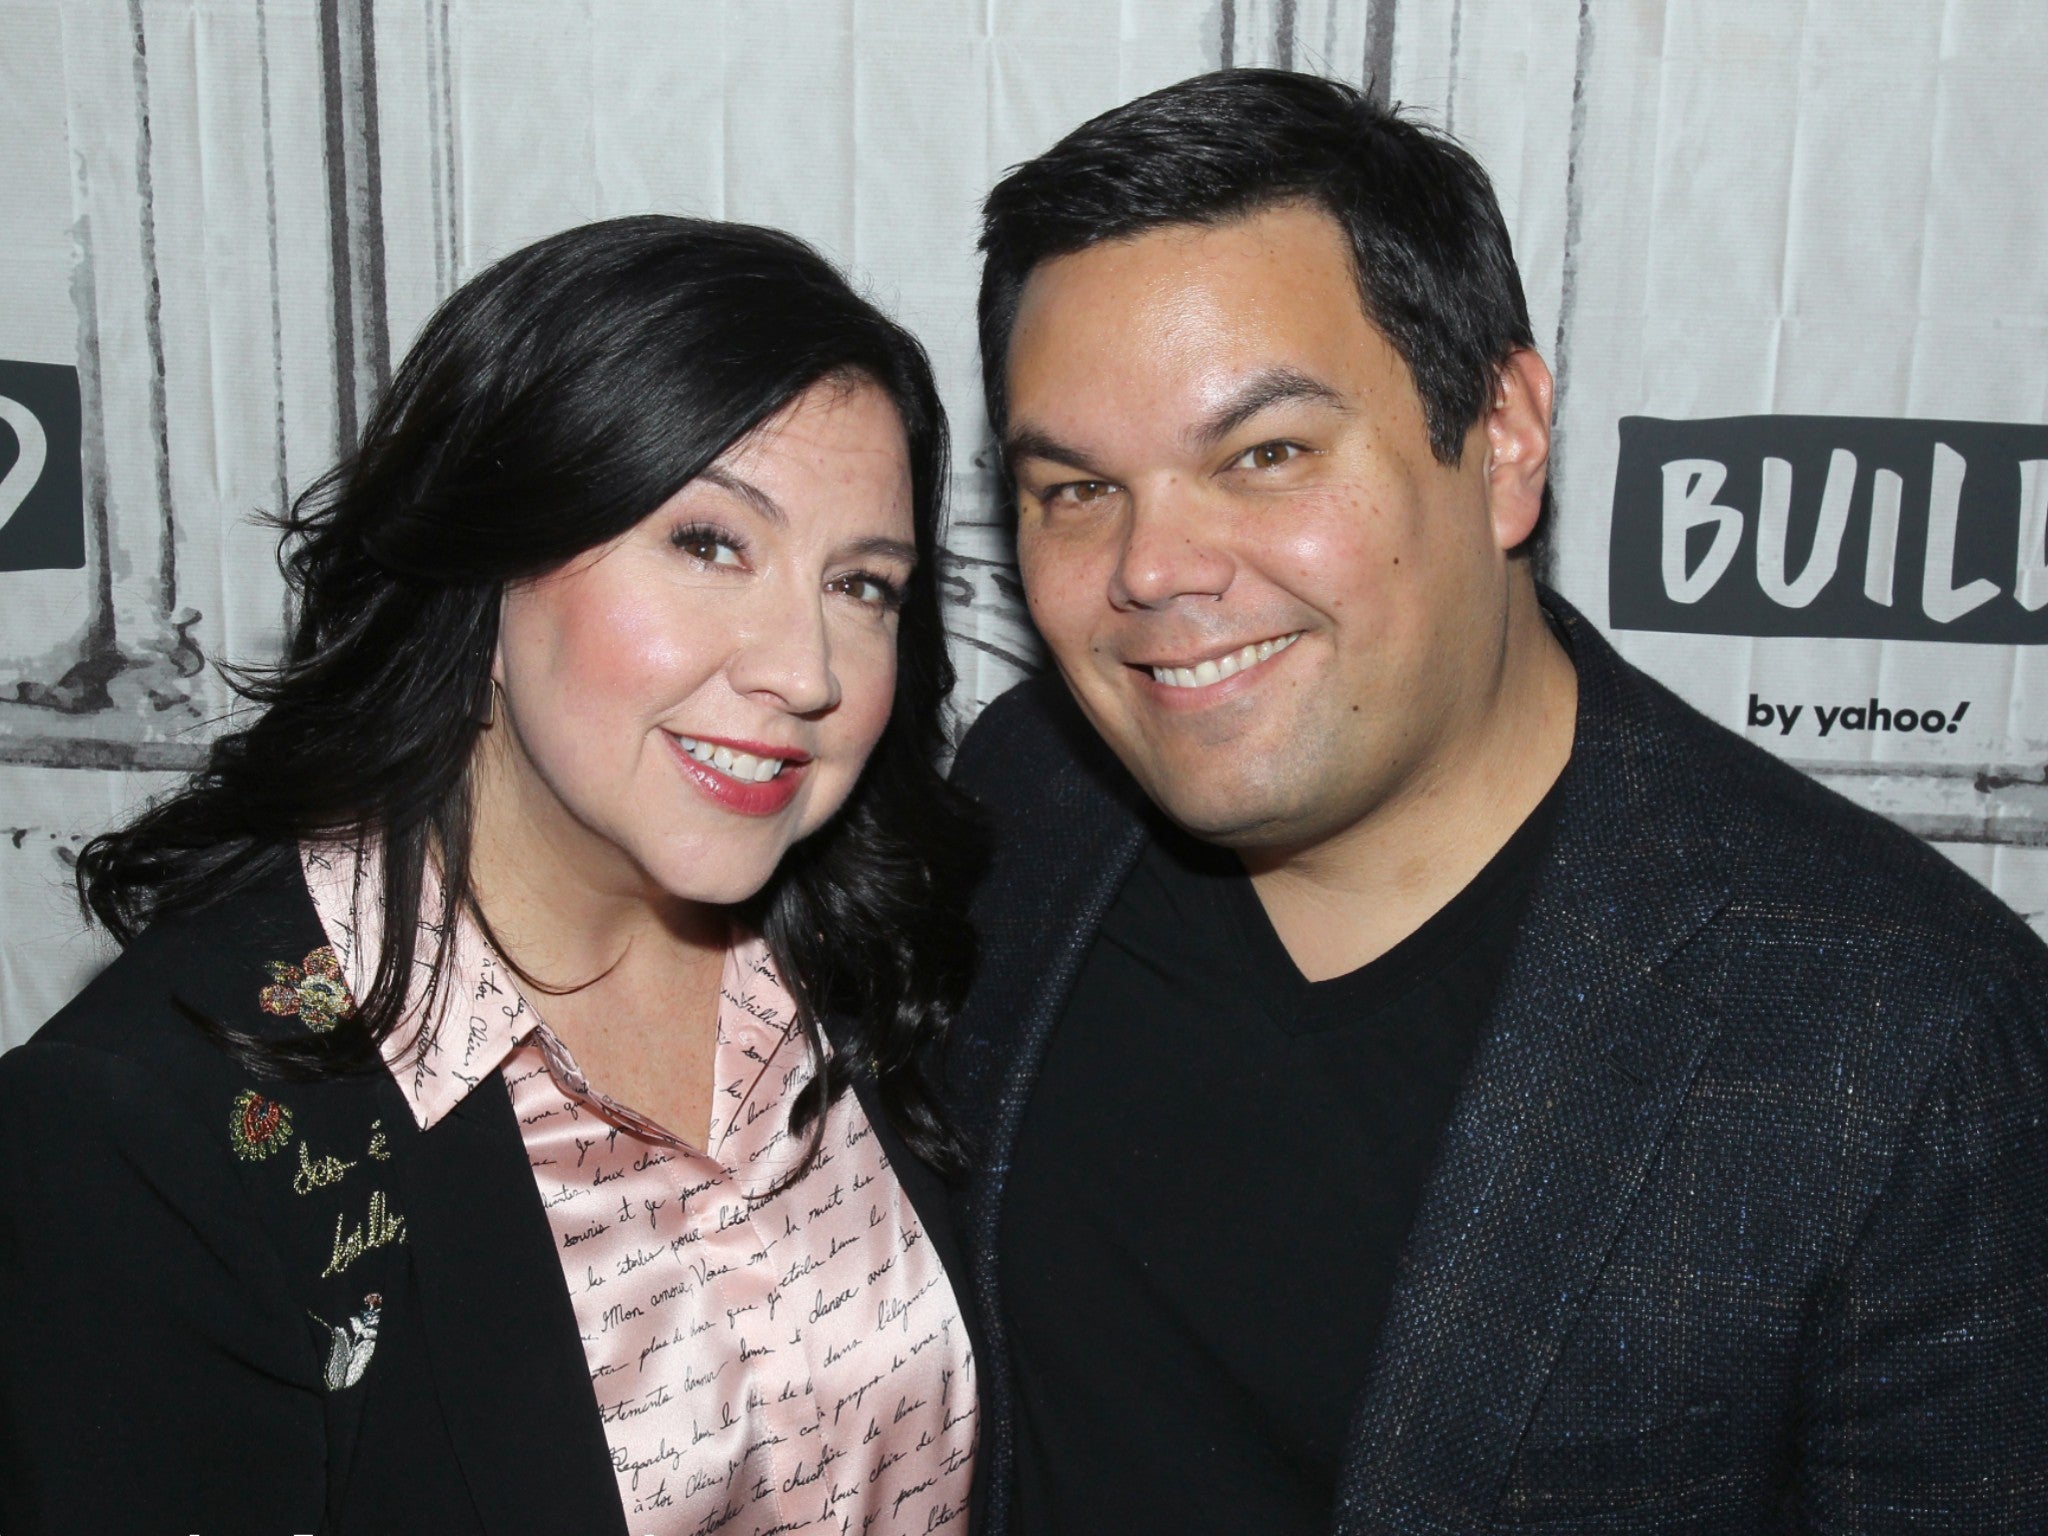 Kristen Anderson Lopez and Robert Lopez - the duo behind the hit song “Let It Go"